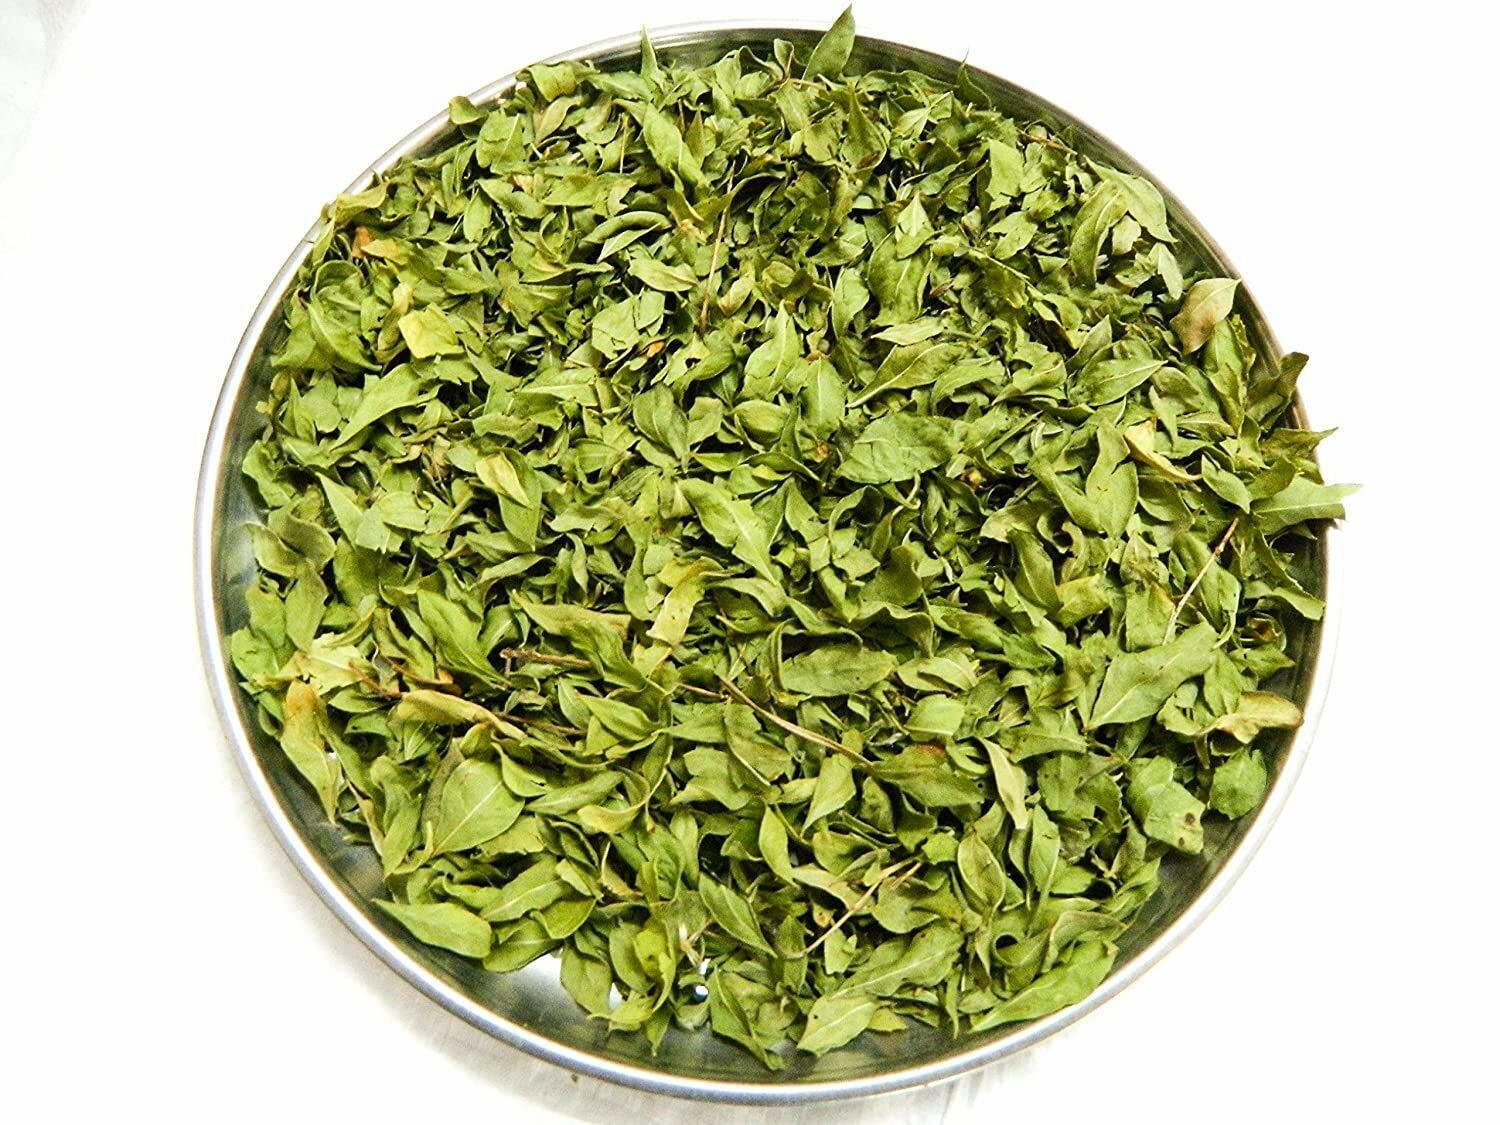 Amishi Henna Leaves ( Natural Cultivated Dried Lawsonia inermis ) For Hair  Care | eBay